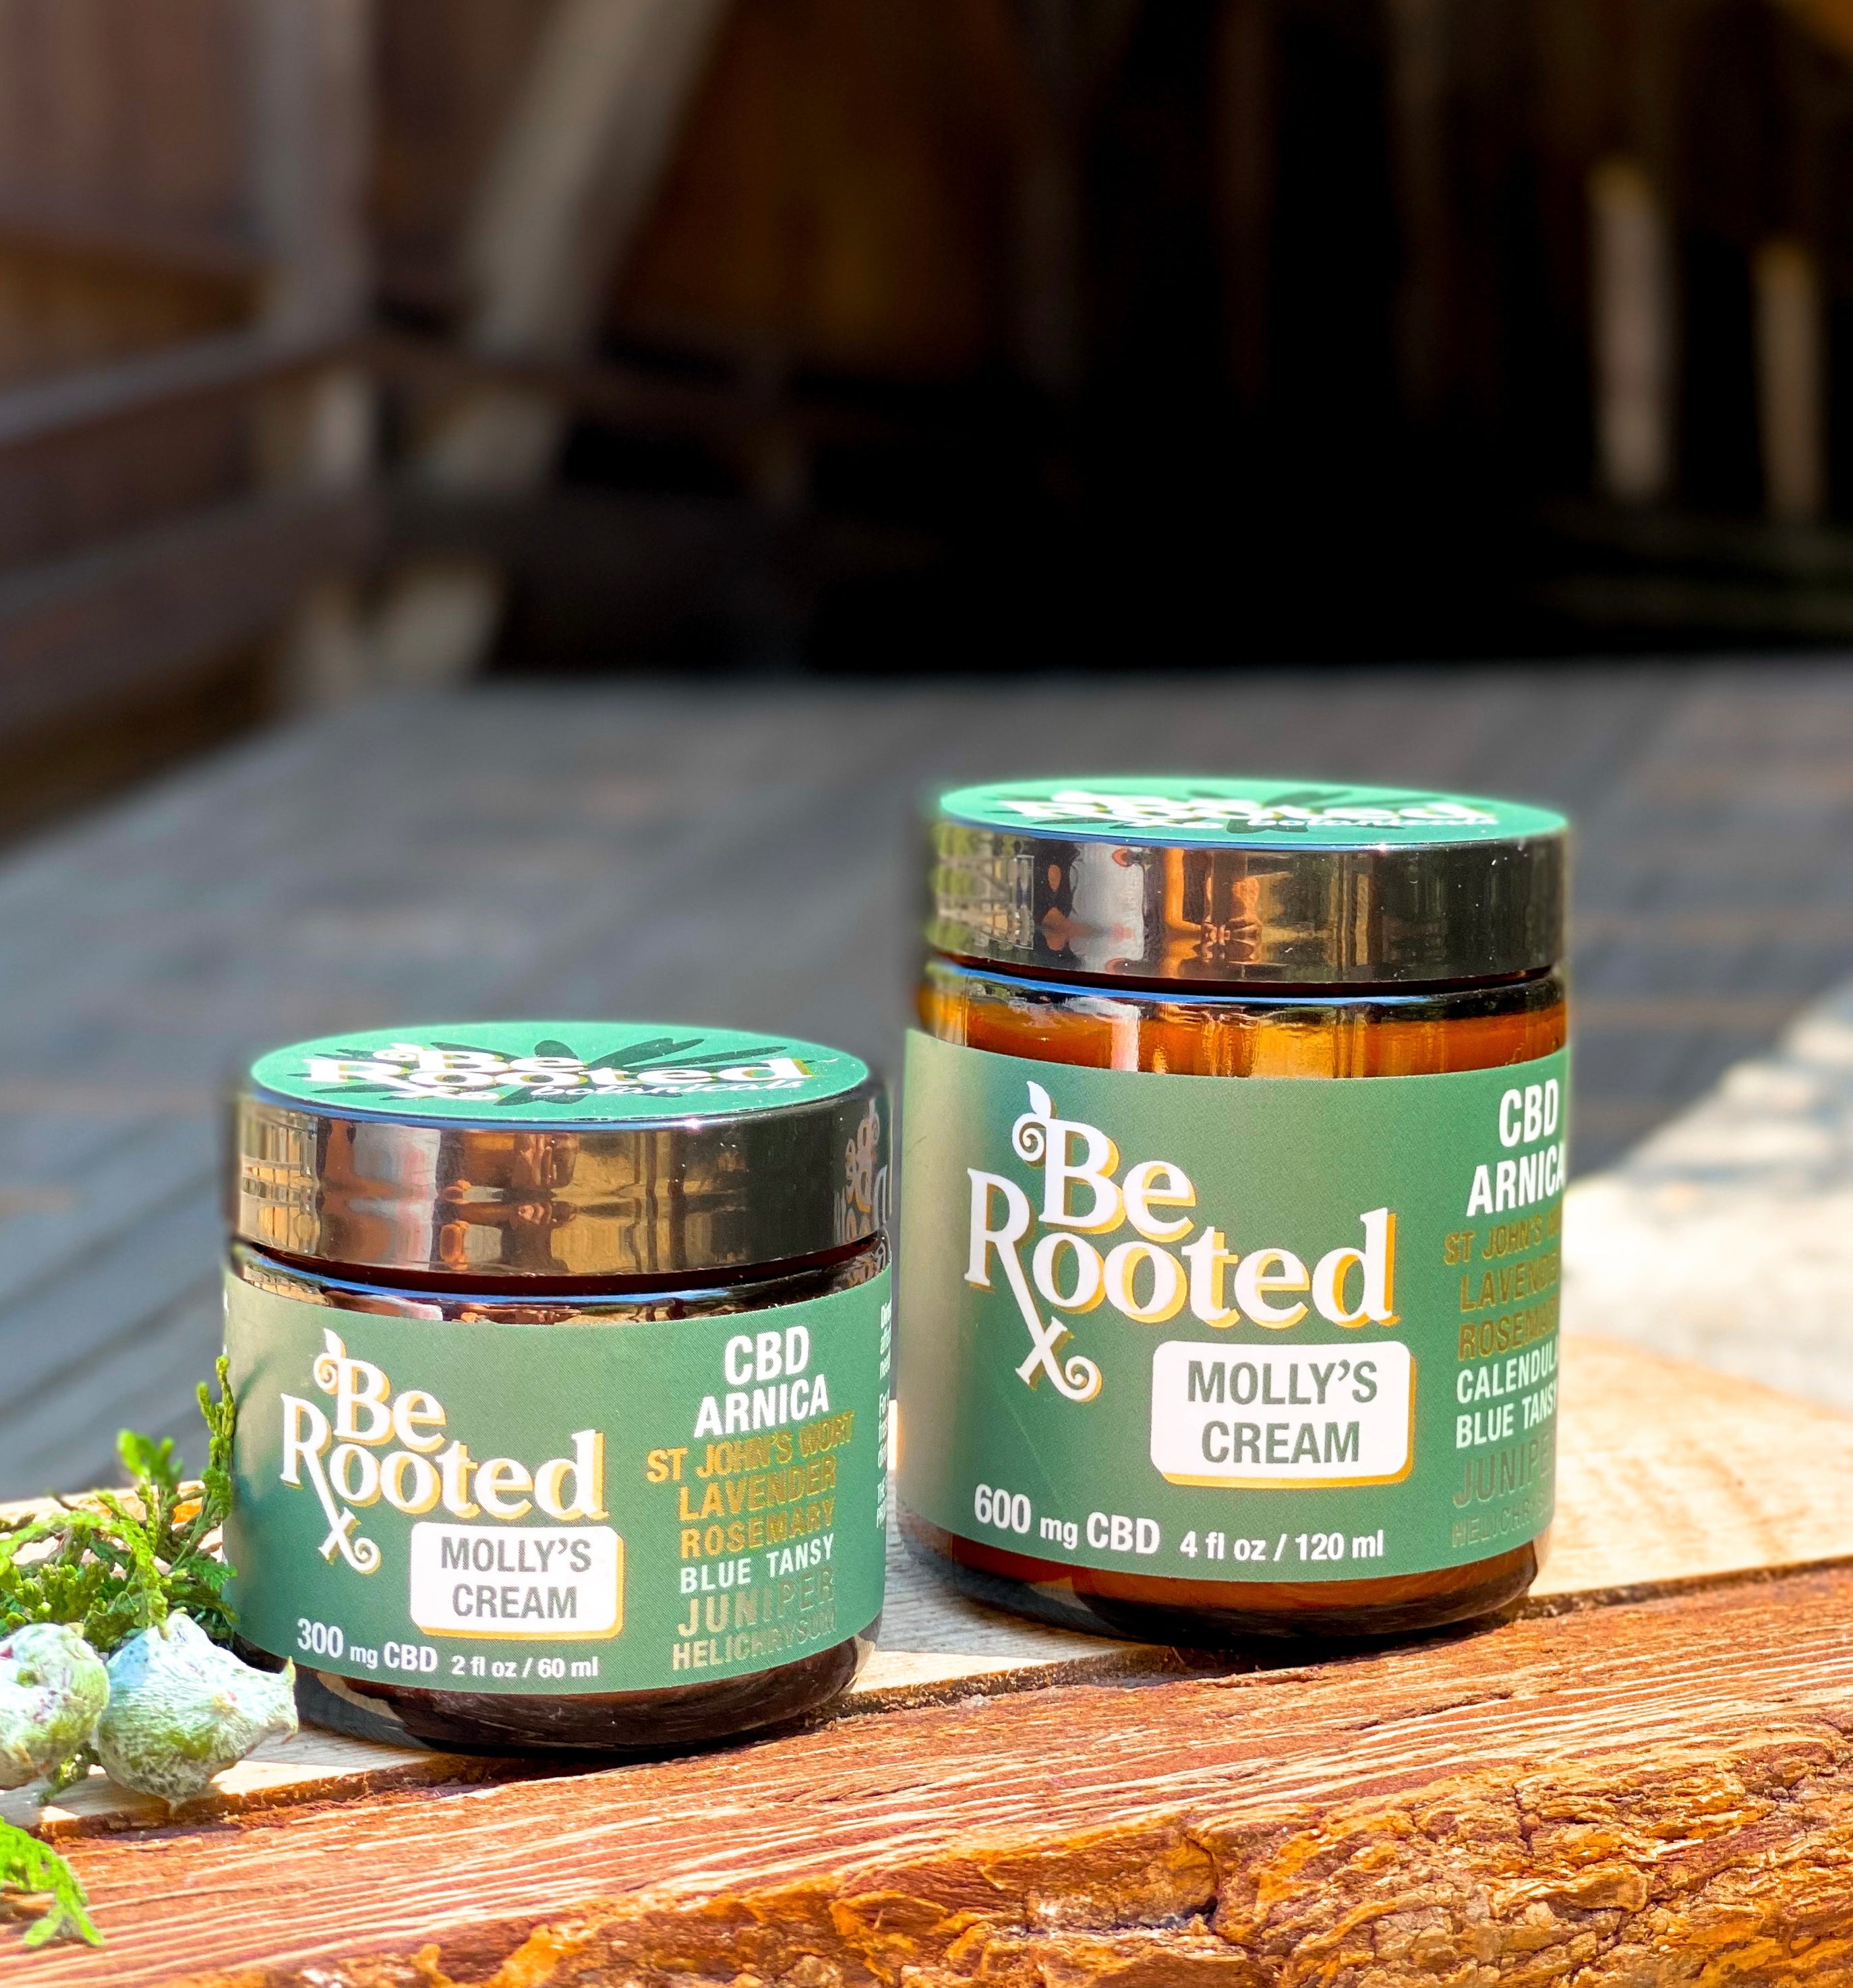 Molly's Cream by Be Rooted Botanicals